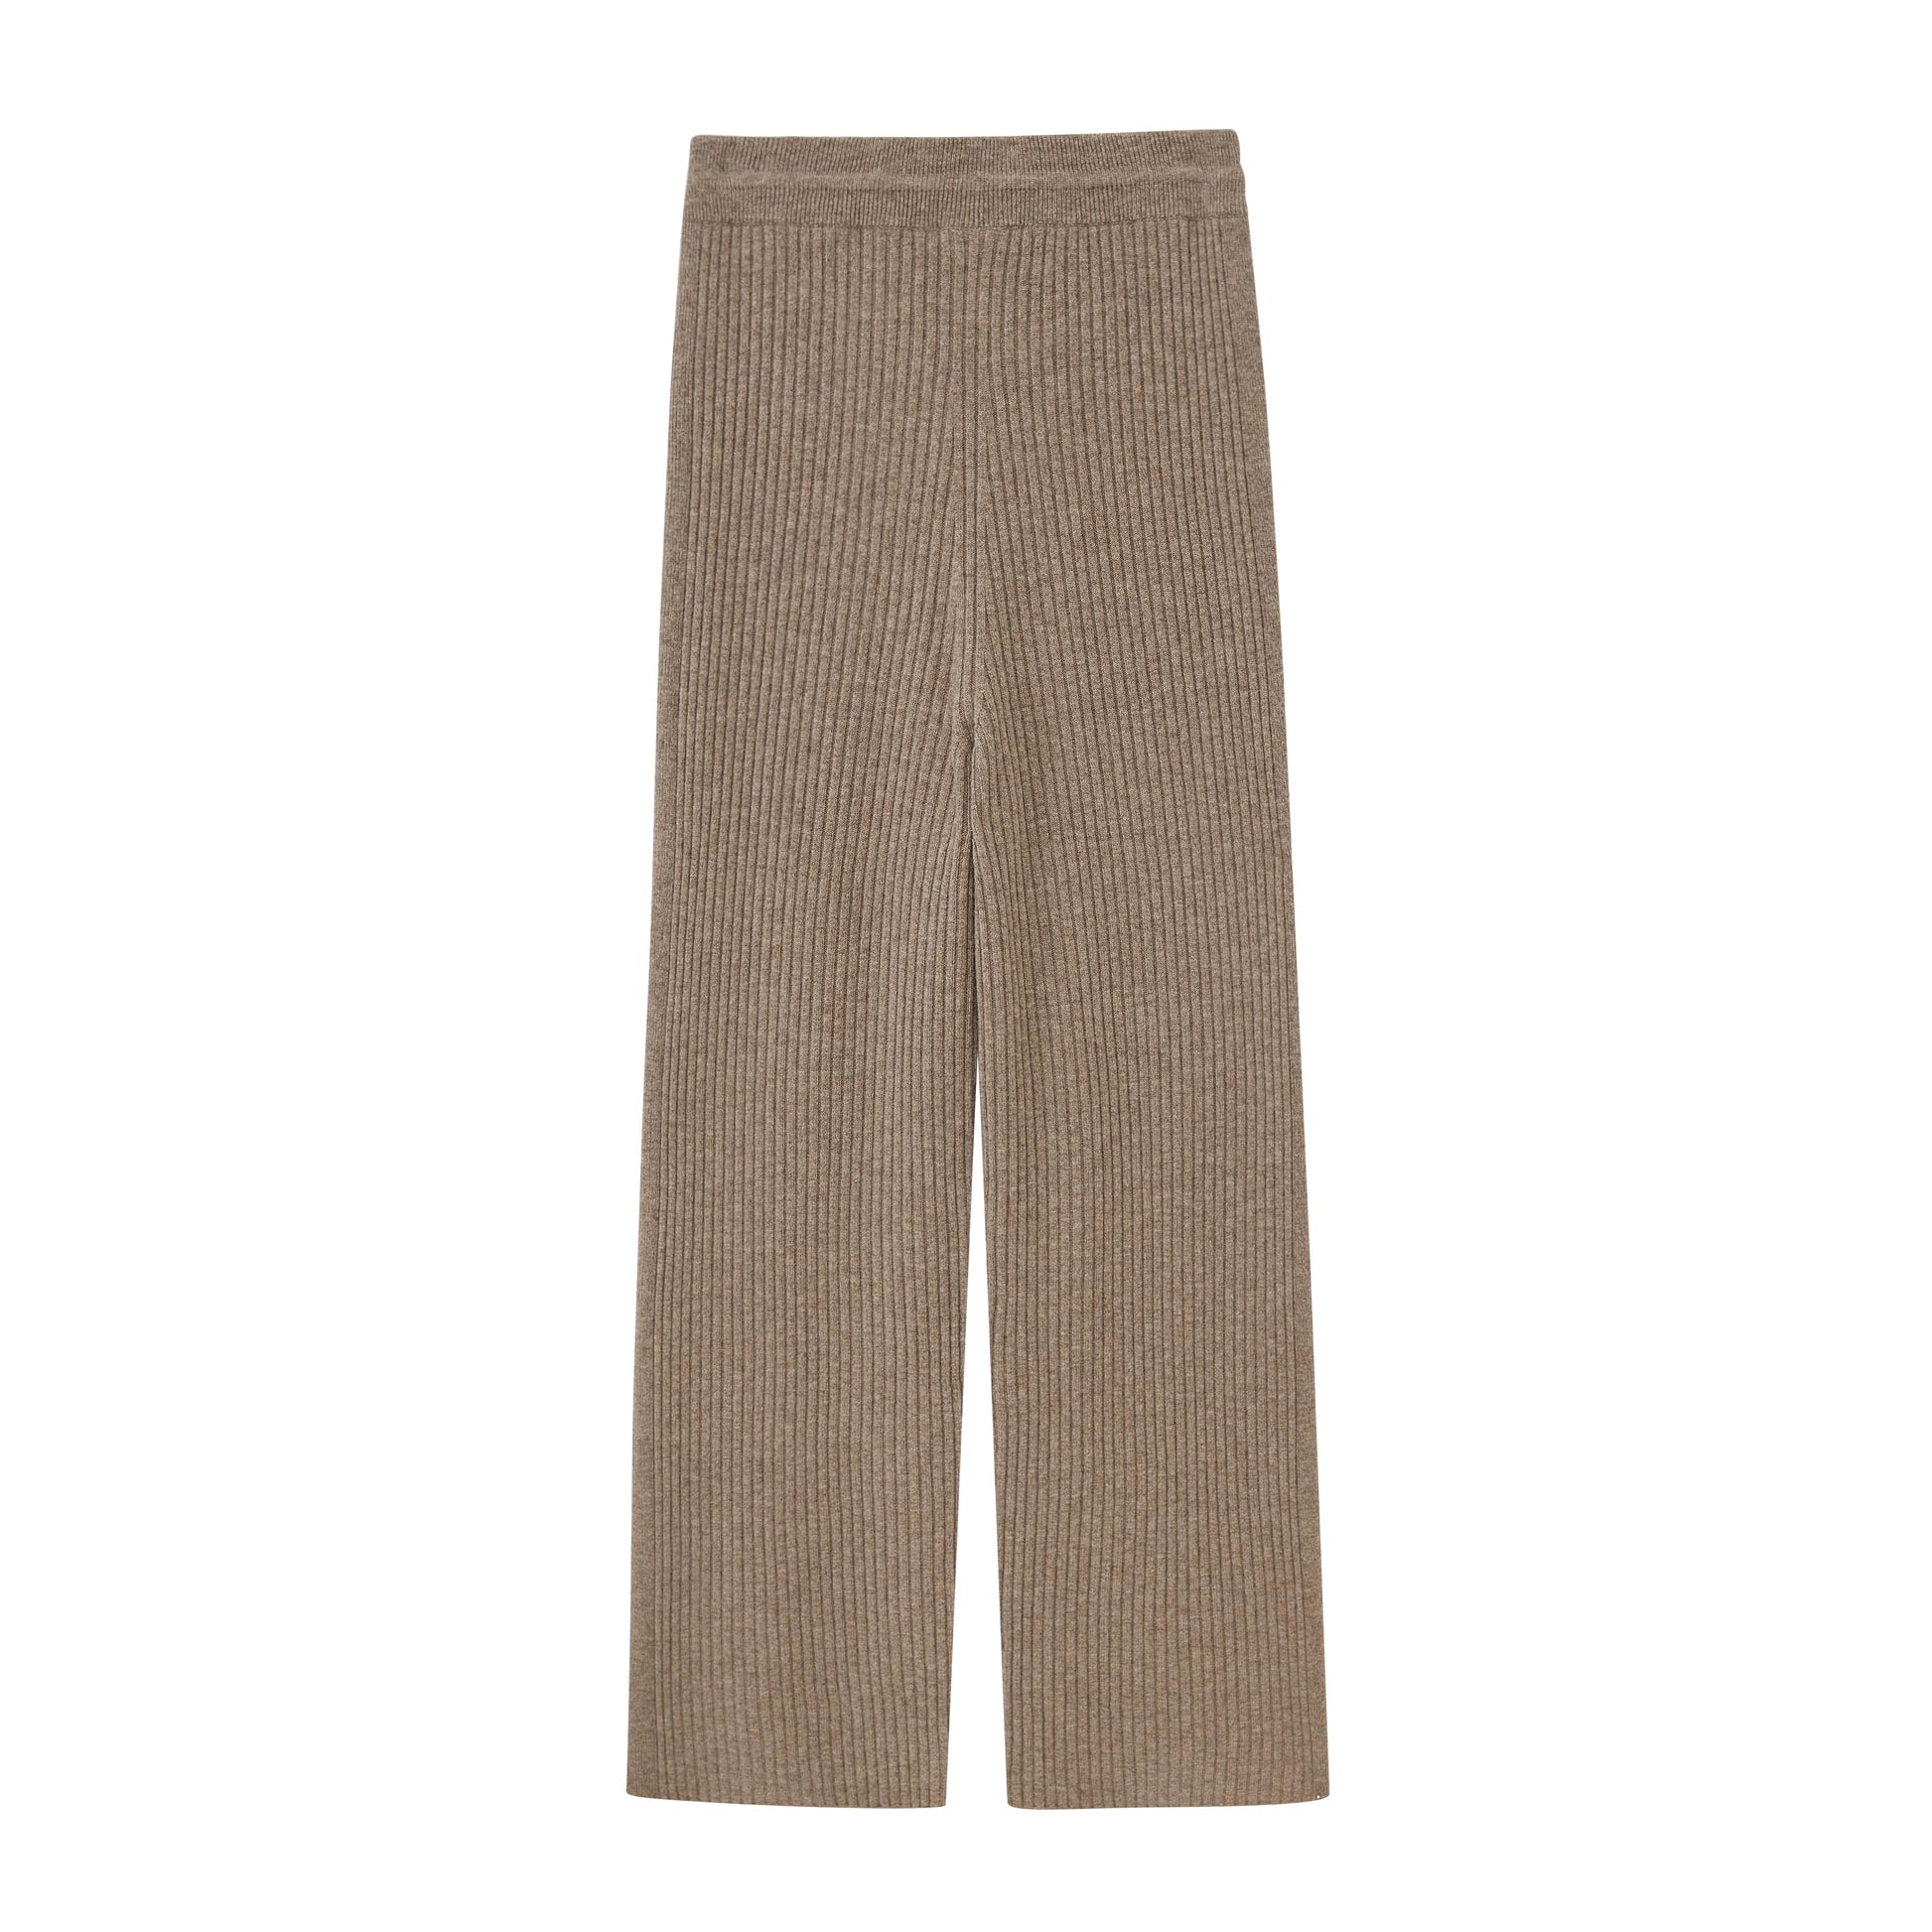 brown flare knitted pants back flat lay